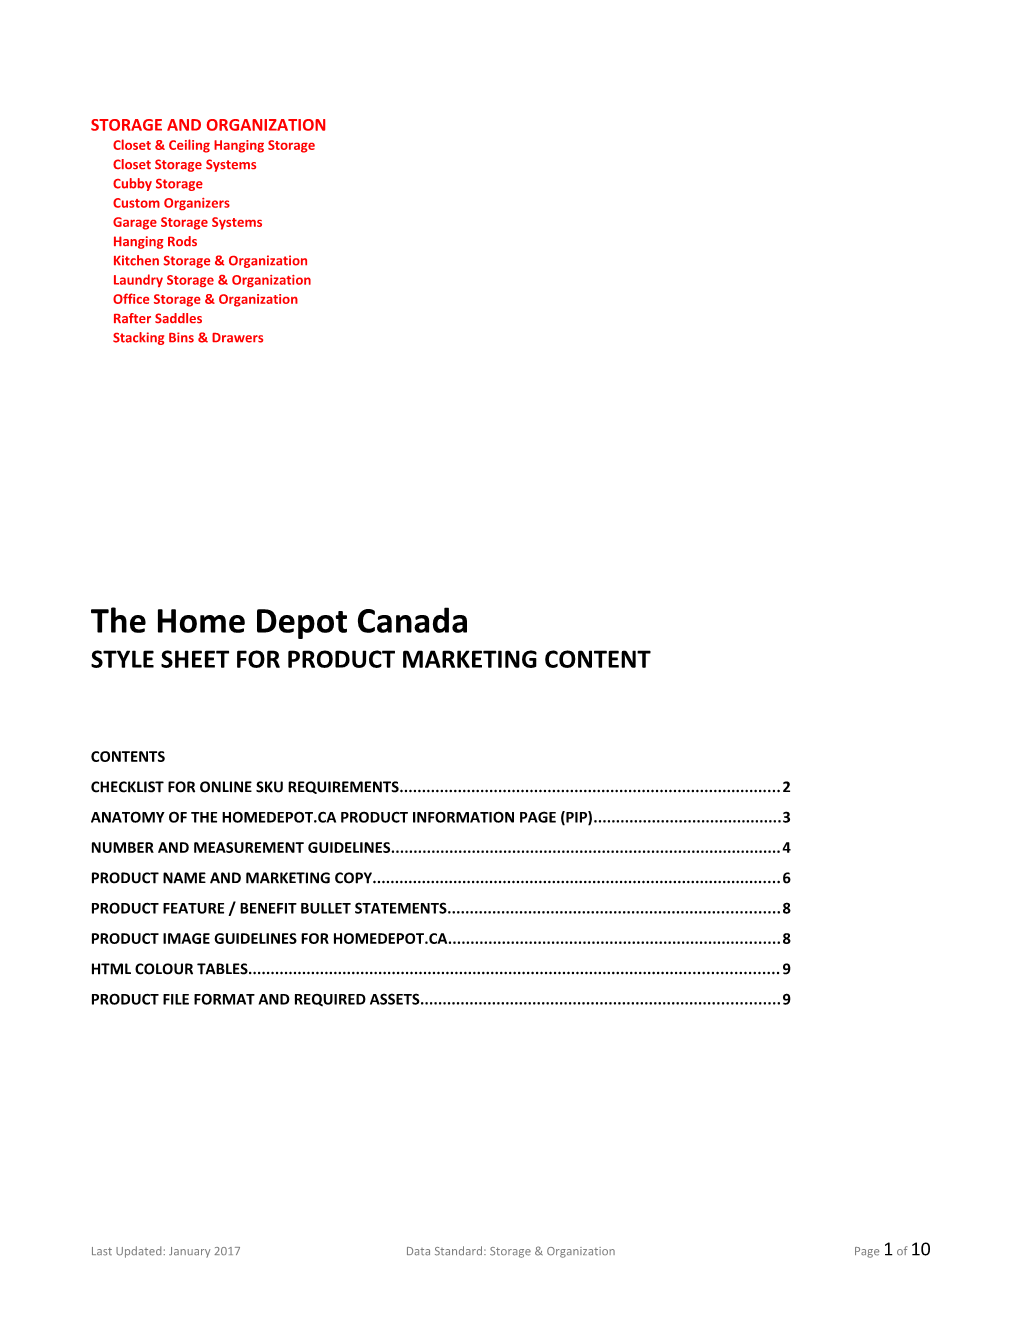 The Home Depot Canada s2